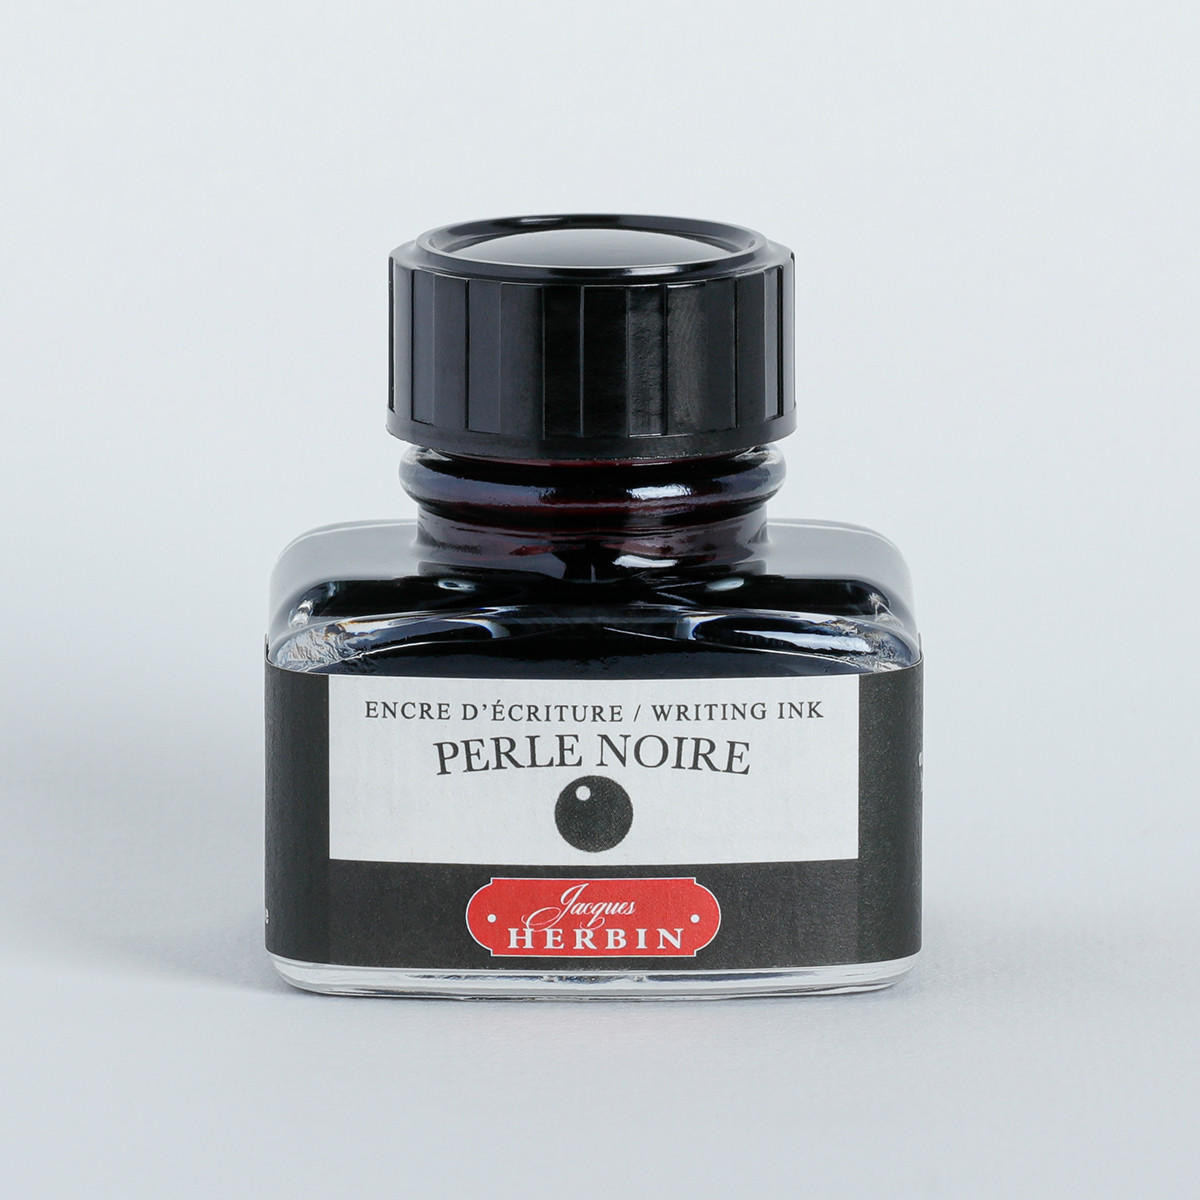 Herbin ’D’ Writing and Drawing Ink 30ml Perle noire